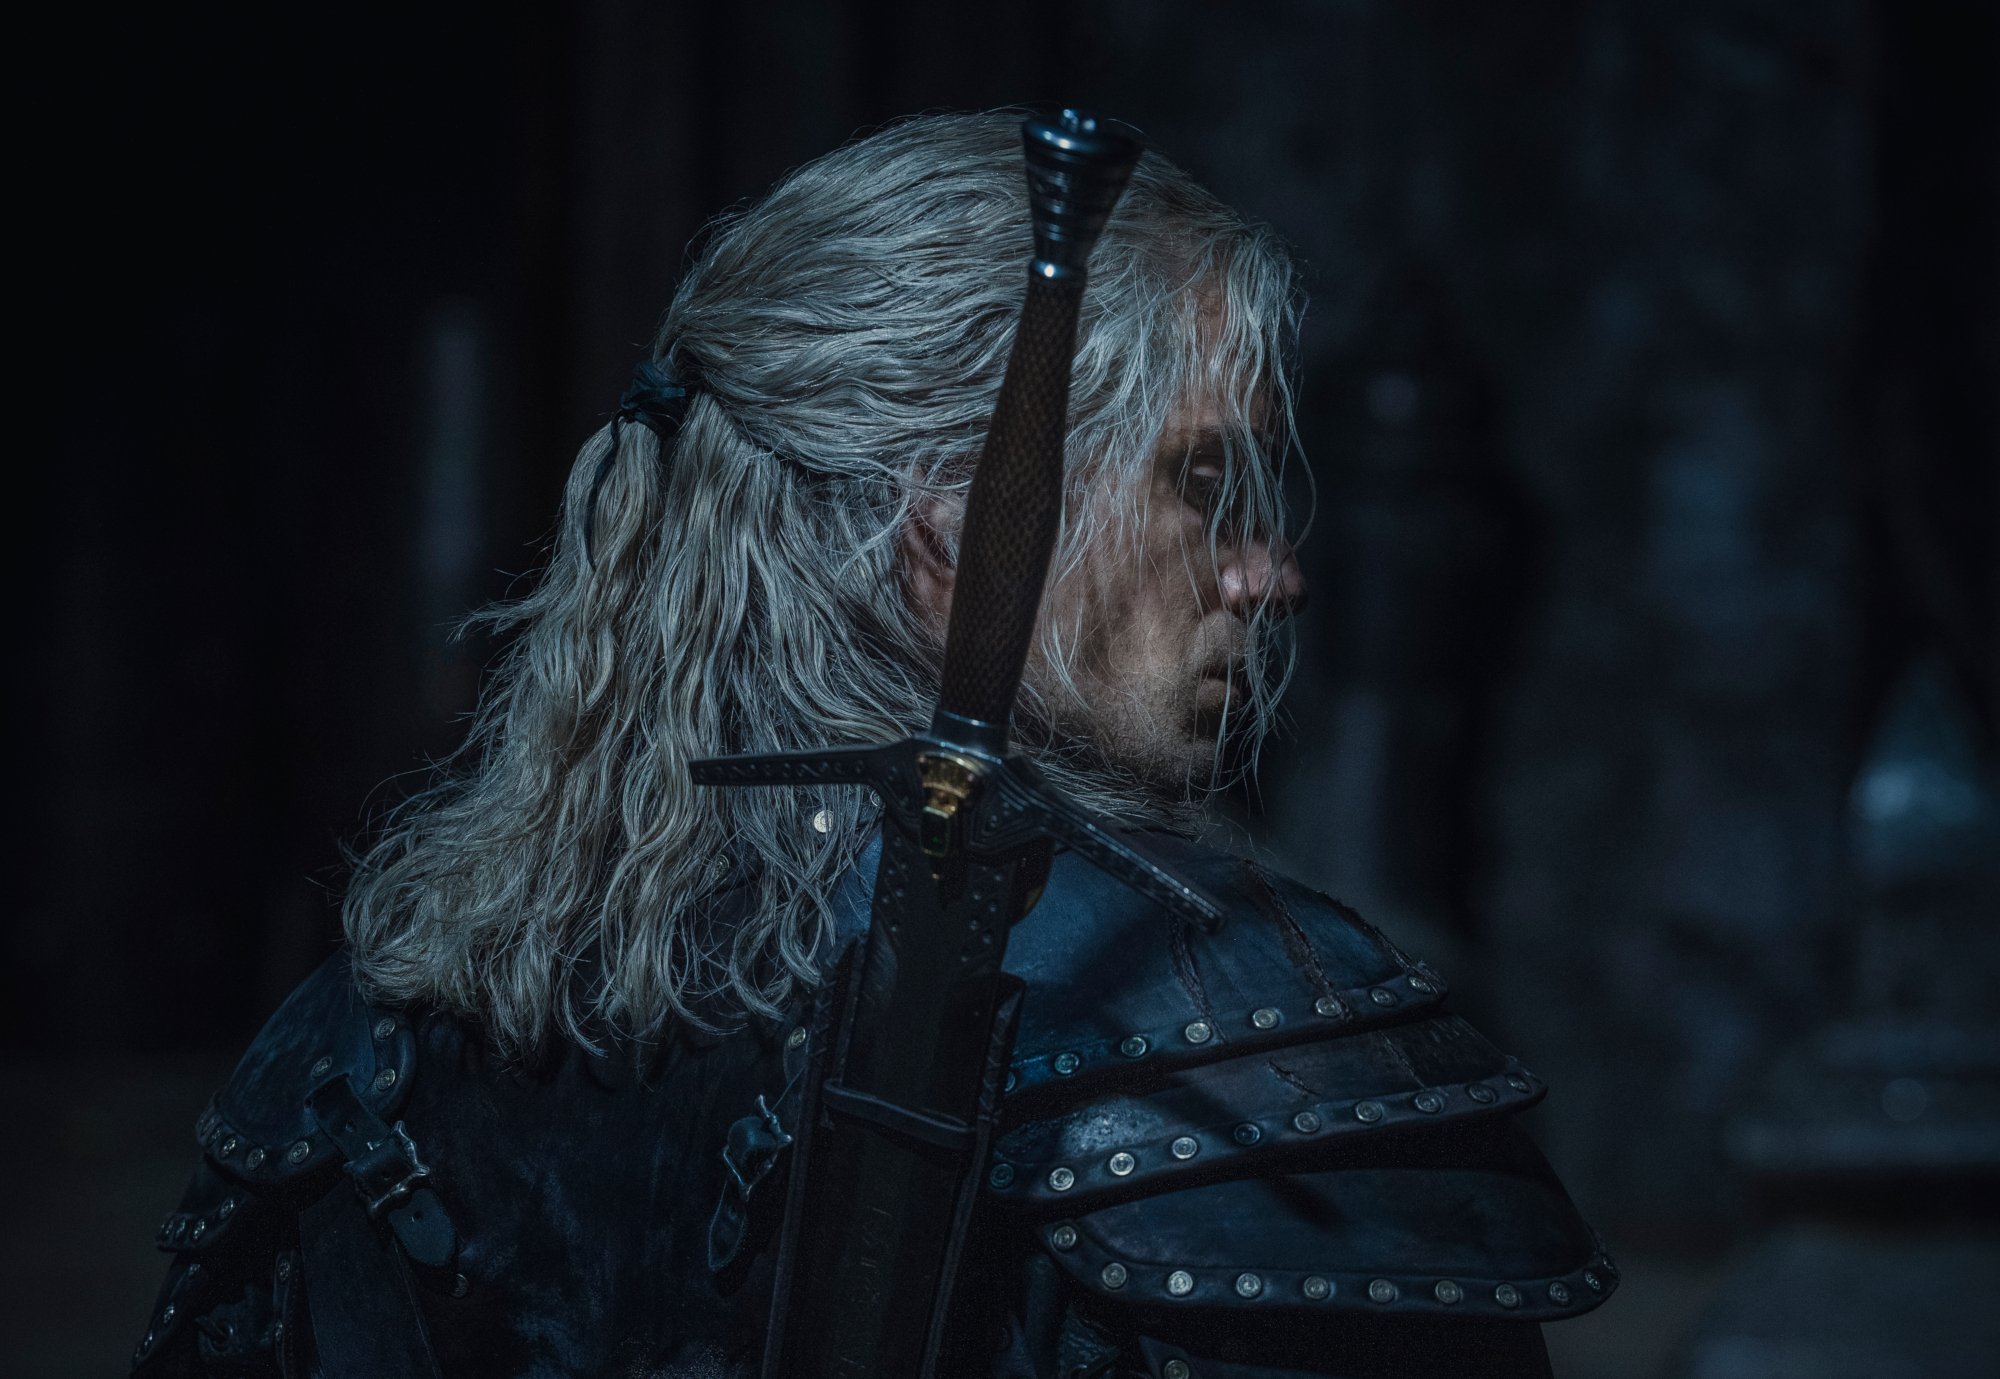 Henry Cavill as Geralt of Rivia in Netflix's 'The Witcher,' which has a prequel series ('The Witcher: Blood Origin') currently in production. Cavill wears dark armor and is facing away from the camera. His blonde hair is messy and he's looking to the side.